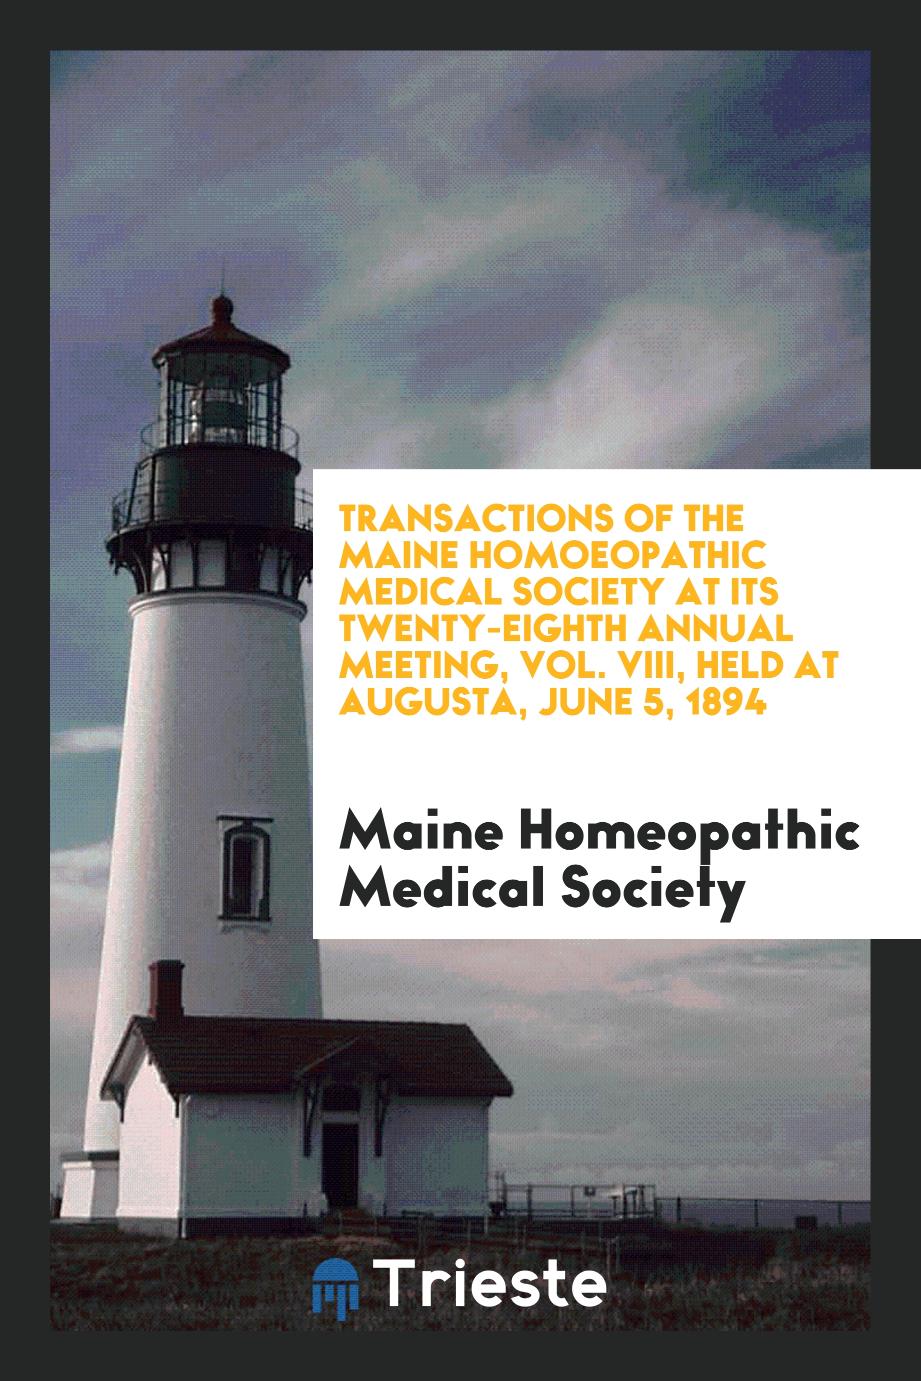 Transactions of the Maine Homoeopathic Medical Society at its Twenty-Eighth Annual Meeting, Vol. VIII, Held at Augusta, June 5, 1894